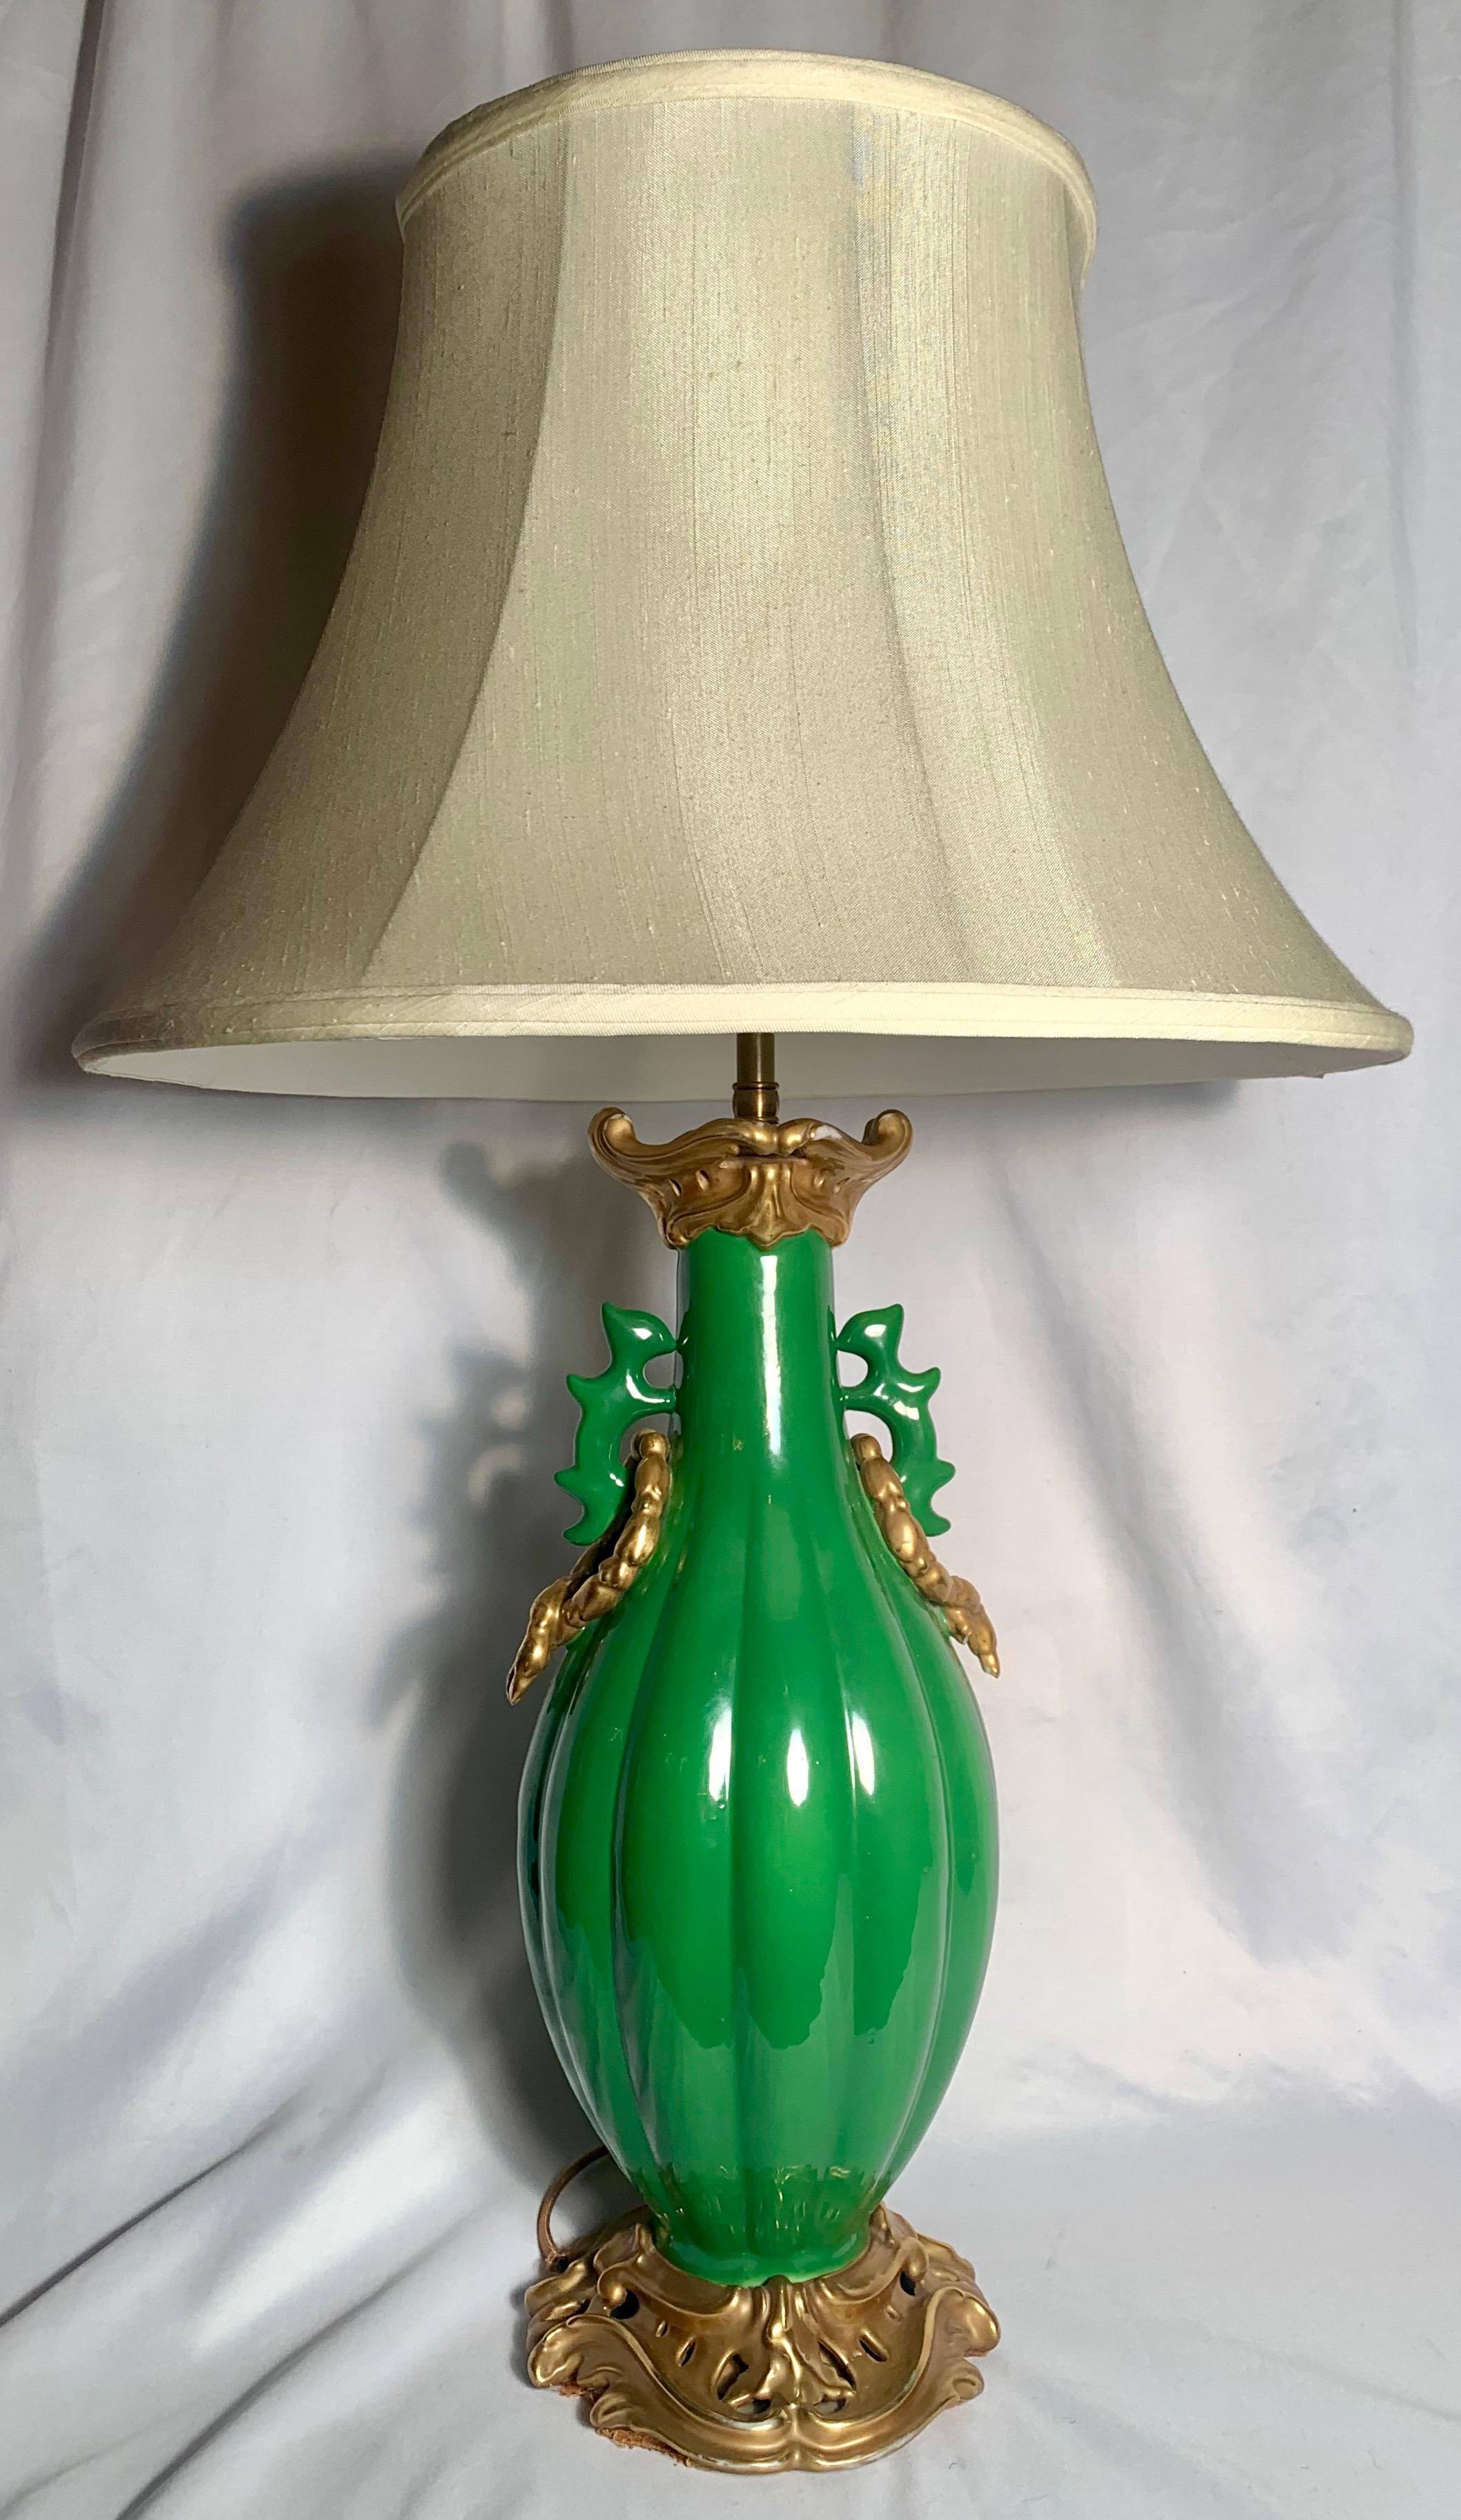 Pair of antique French porcelain lamps.
  
  